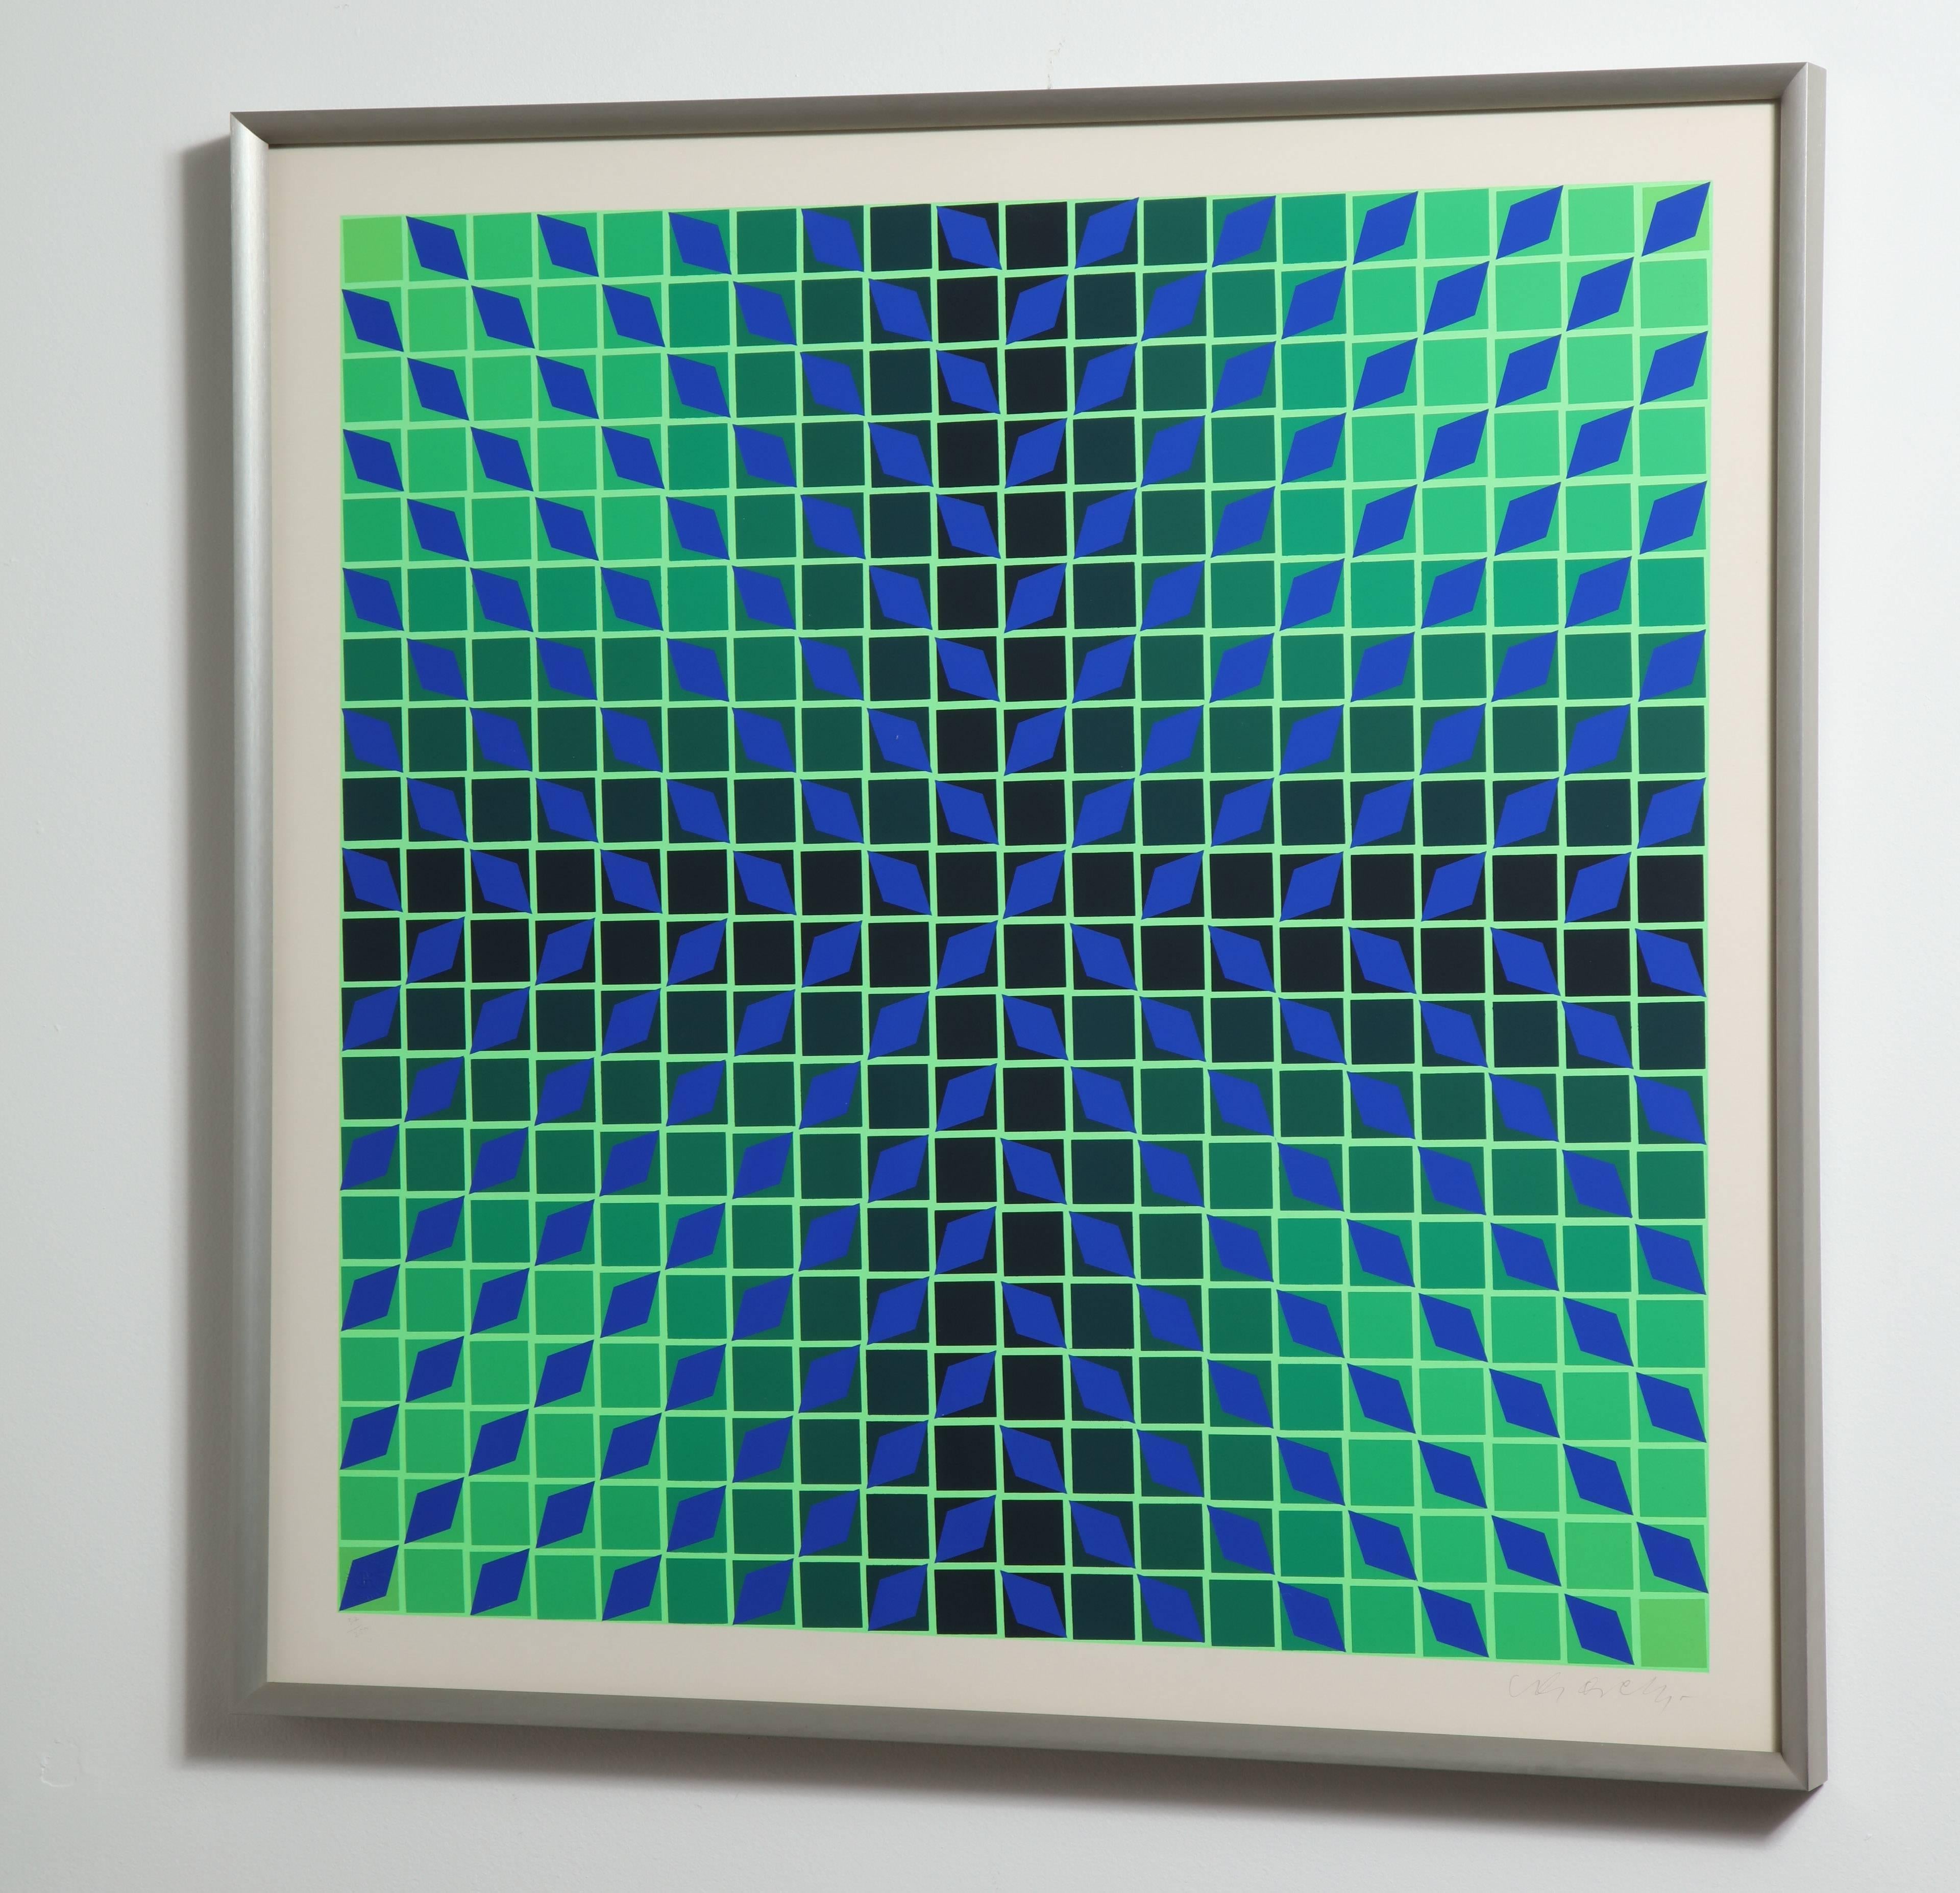 Op Art serigraph from Hungarian/French artist Victor Vasarely, signed in lower corner and numbered 32/250. The original work is professionally framed in a matte brushed aluminum frame.